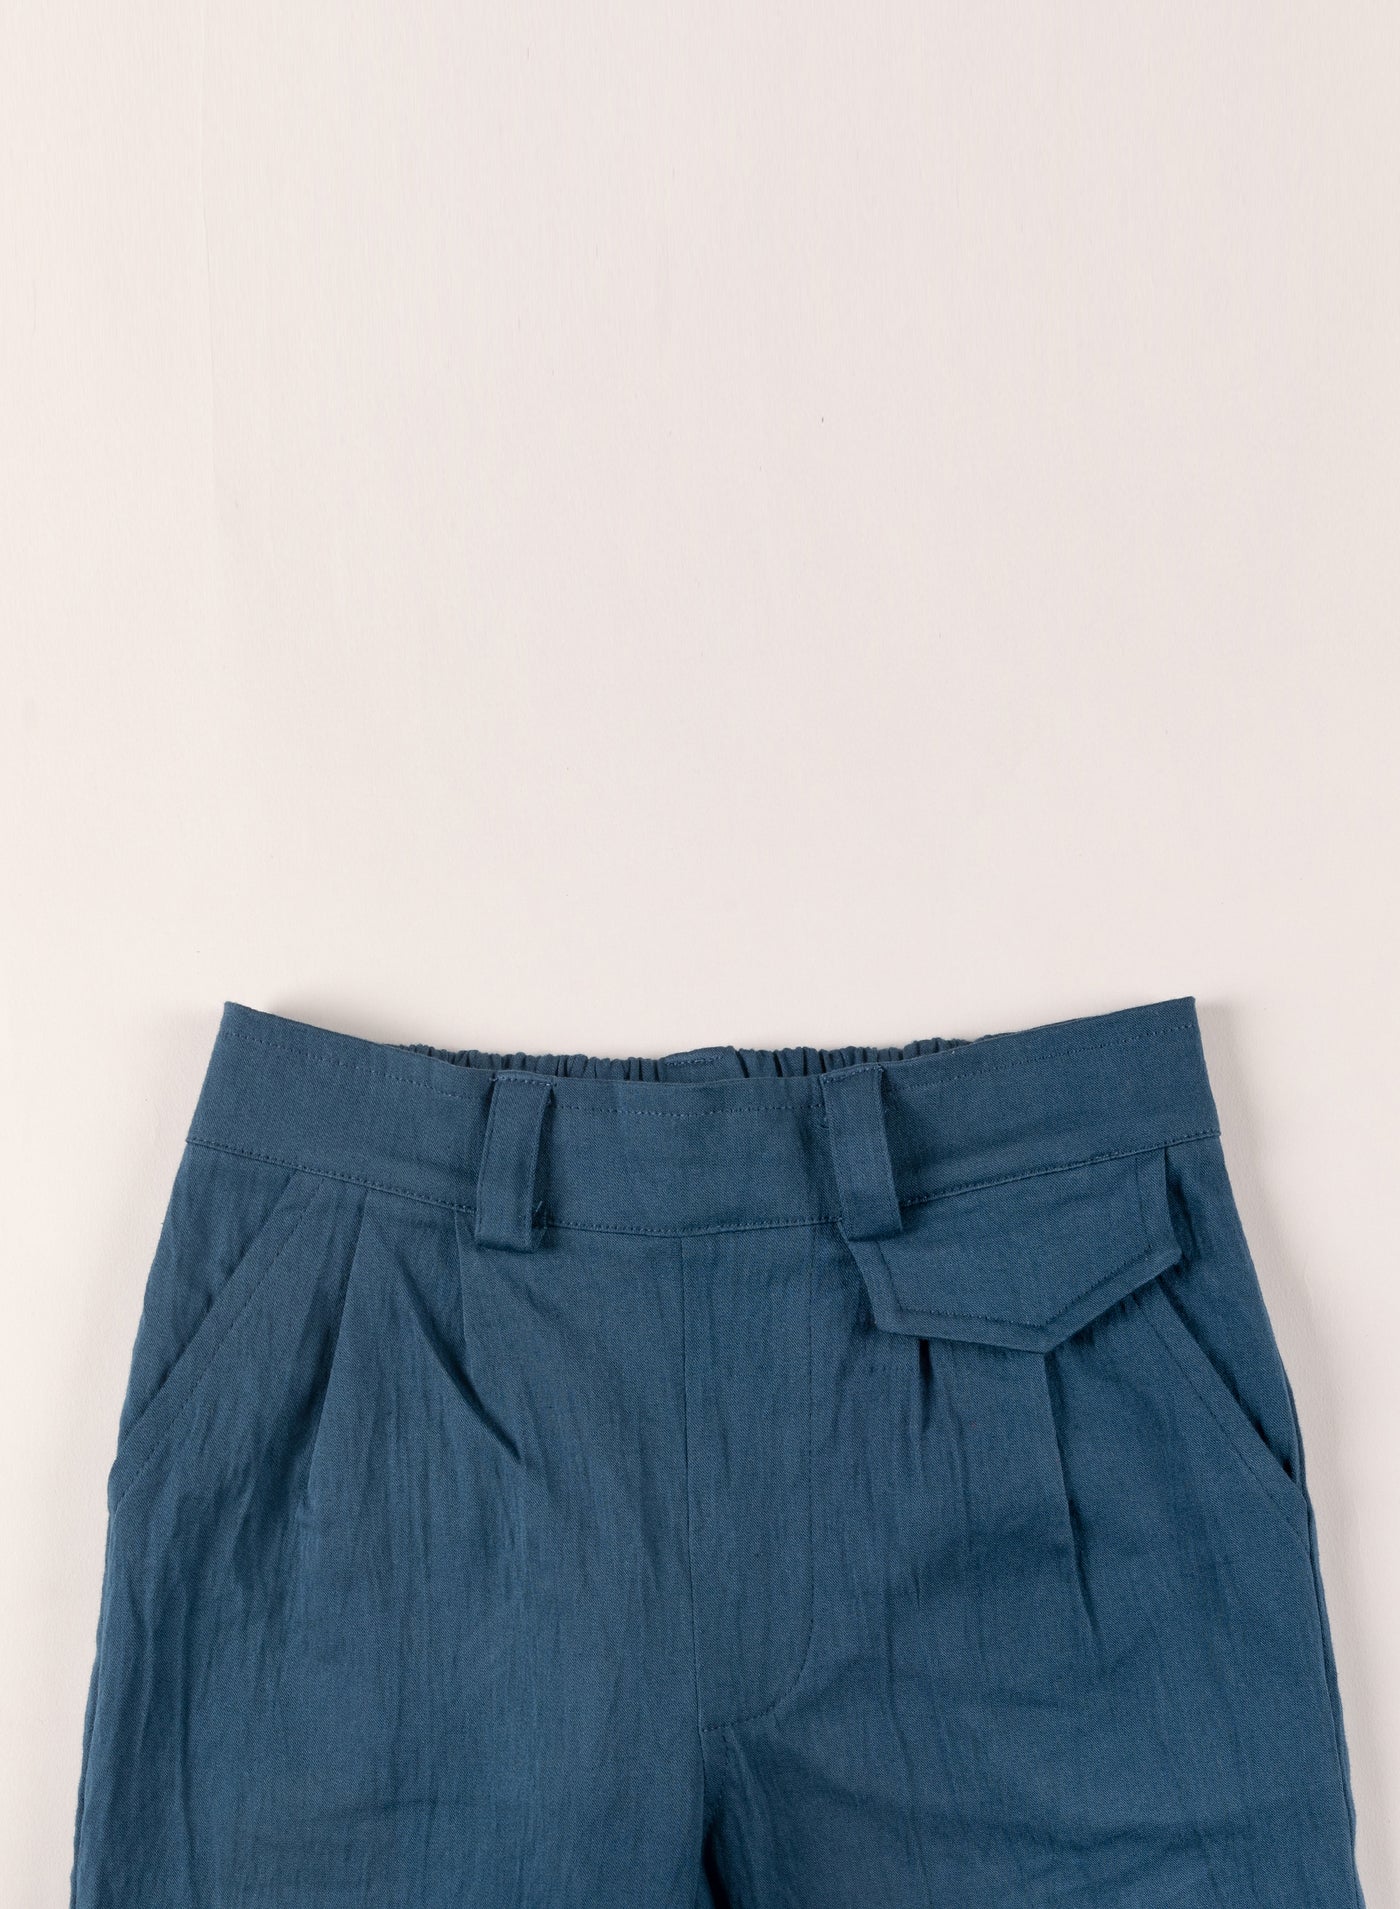 Darcy Pants - From Elfin House